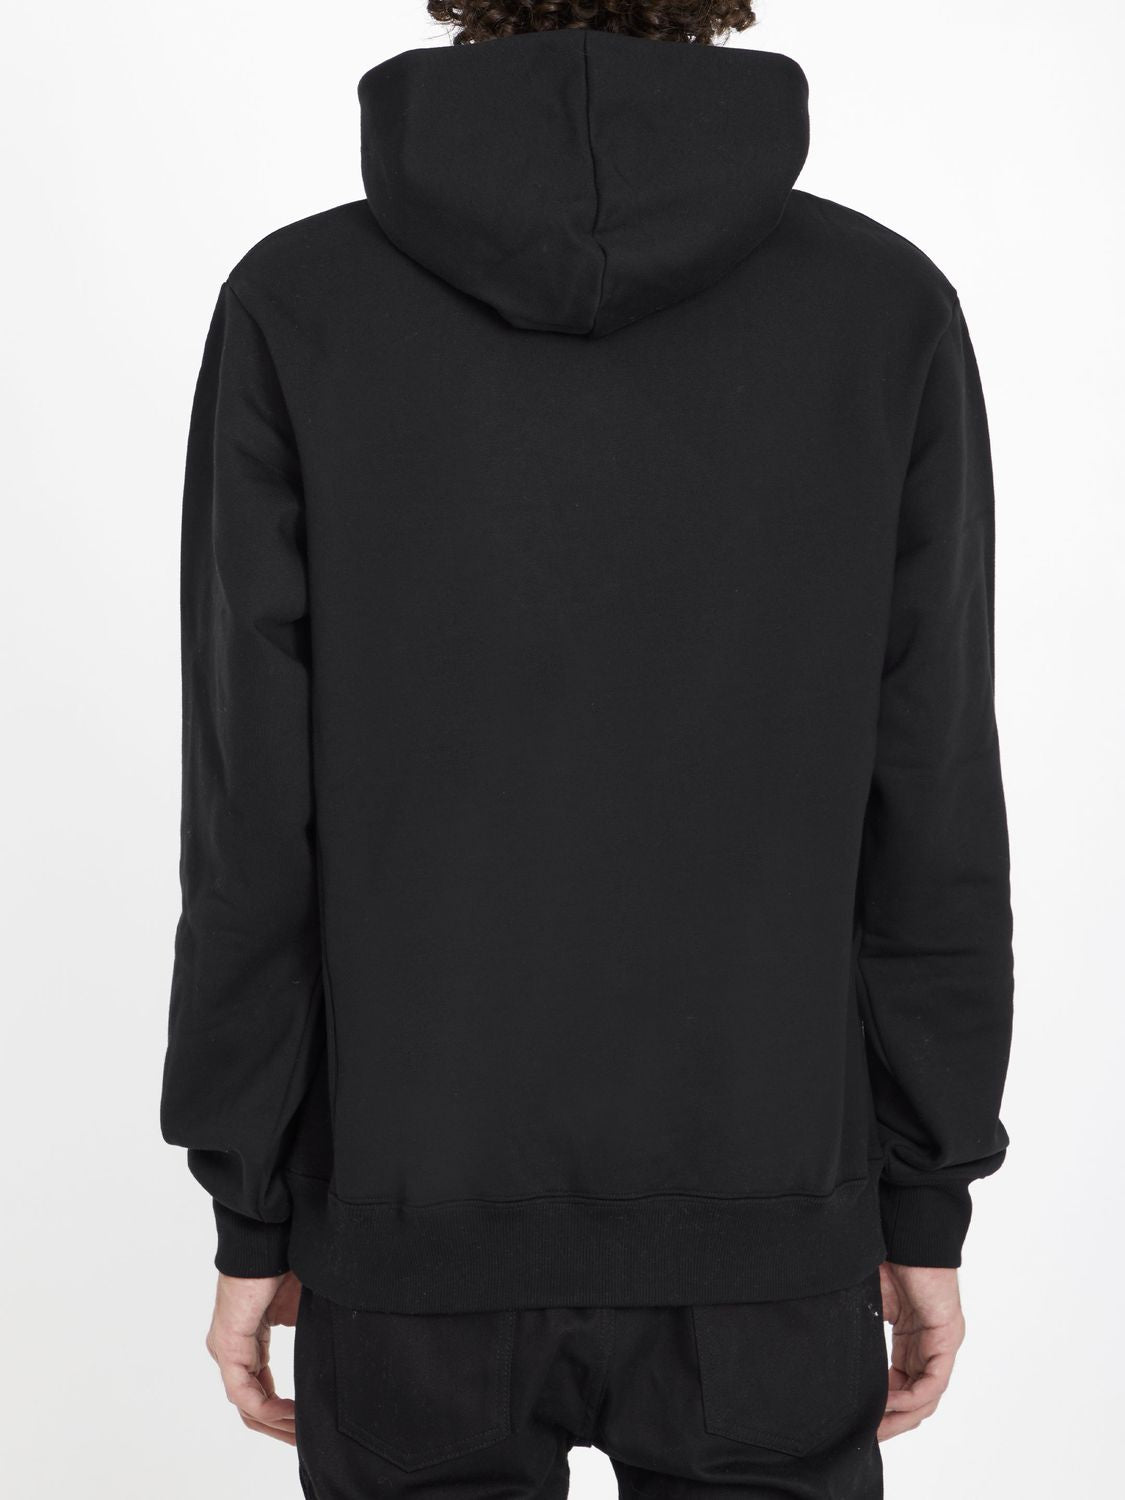 DIOR HOMME Relaxed Fit Black Dior Multi Hoodie for Men - 100% Cotton